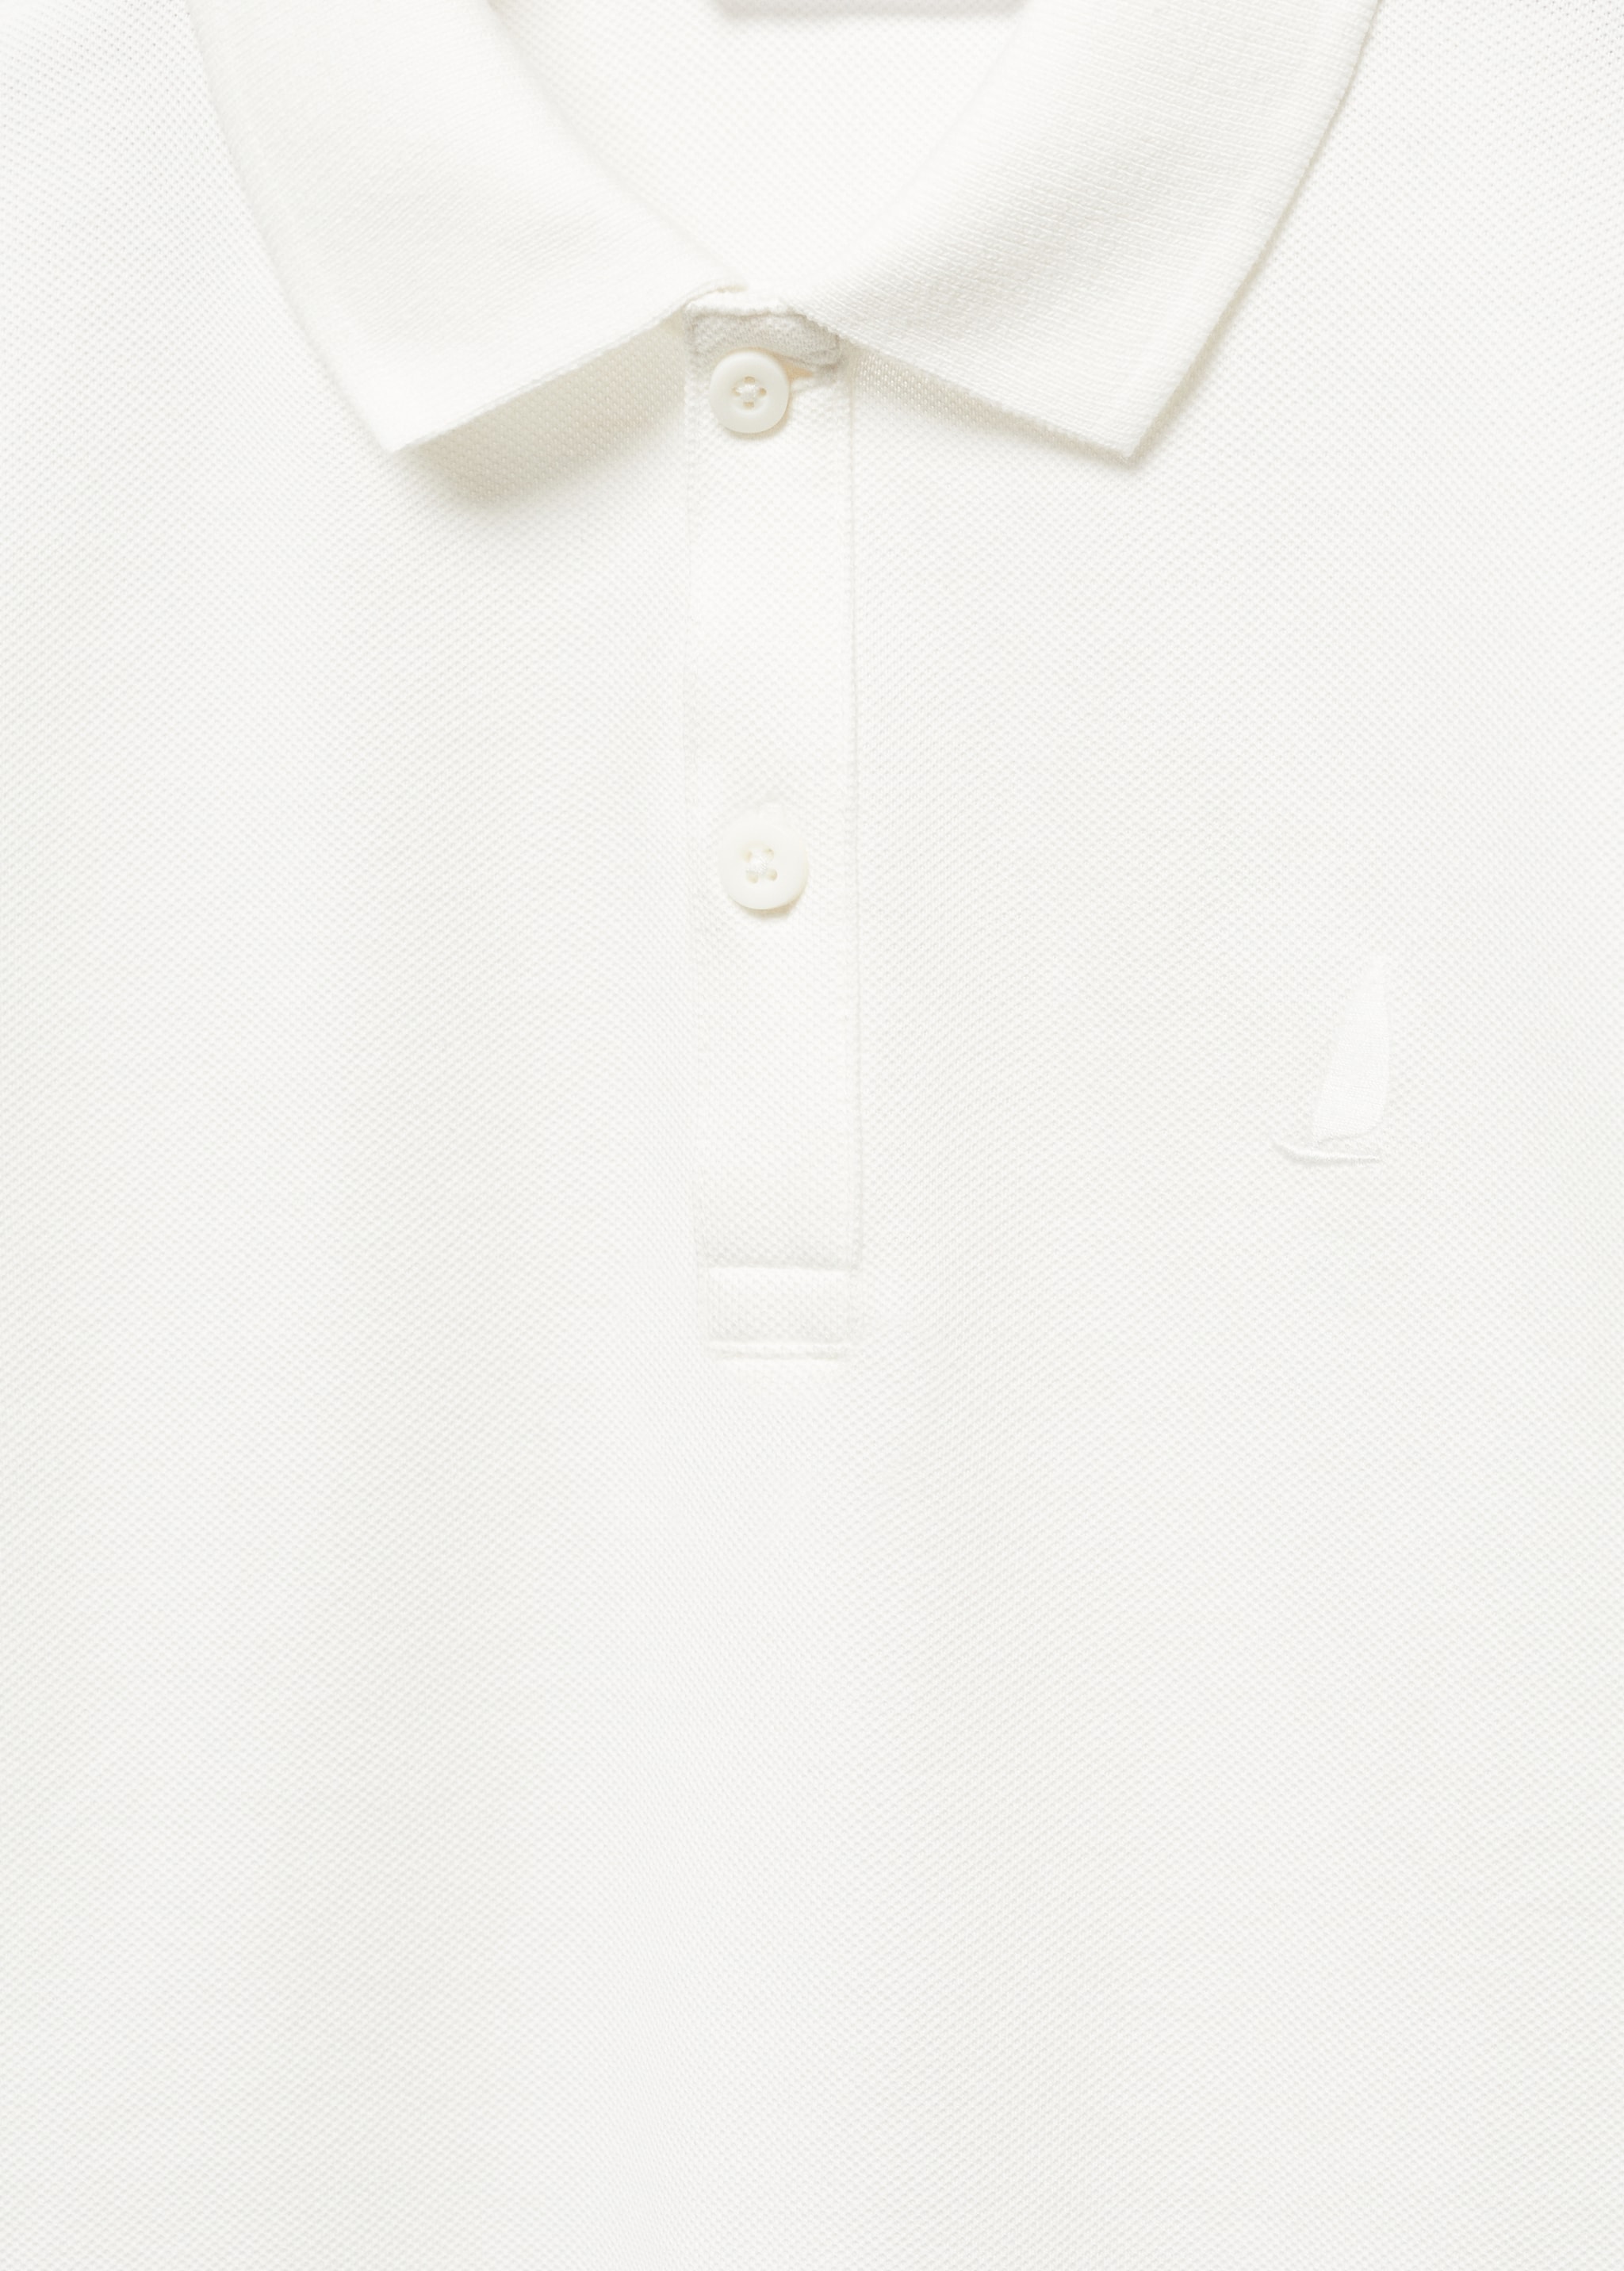 100% cotton polo shirt - Details of the article 8